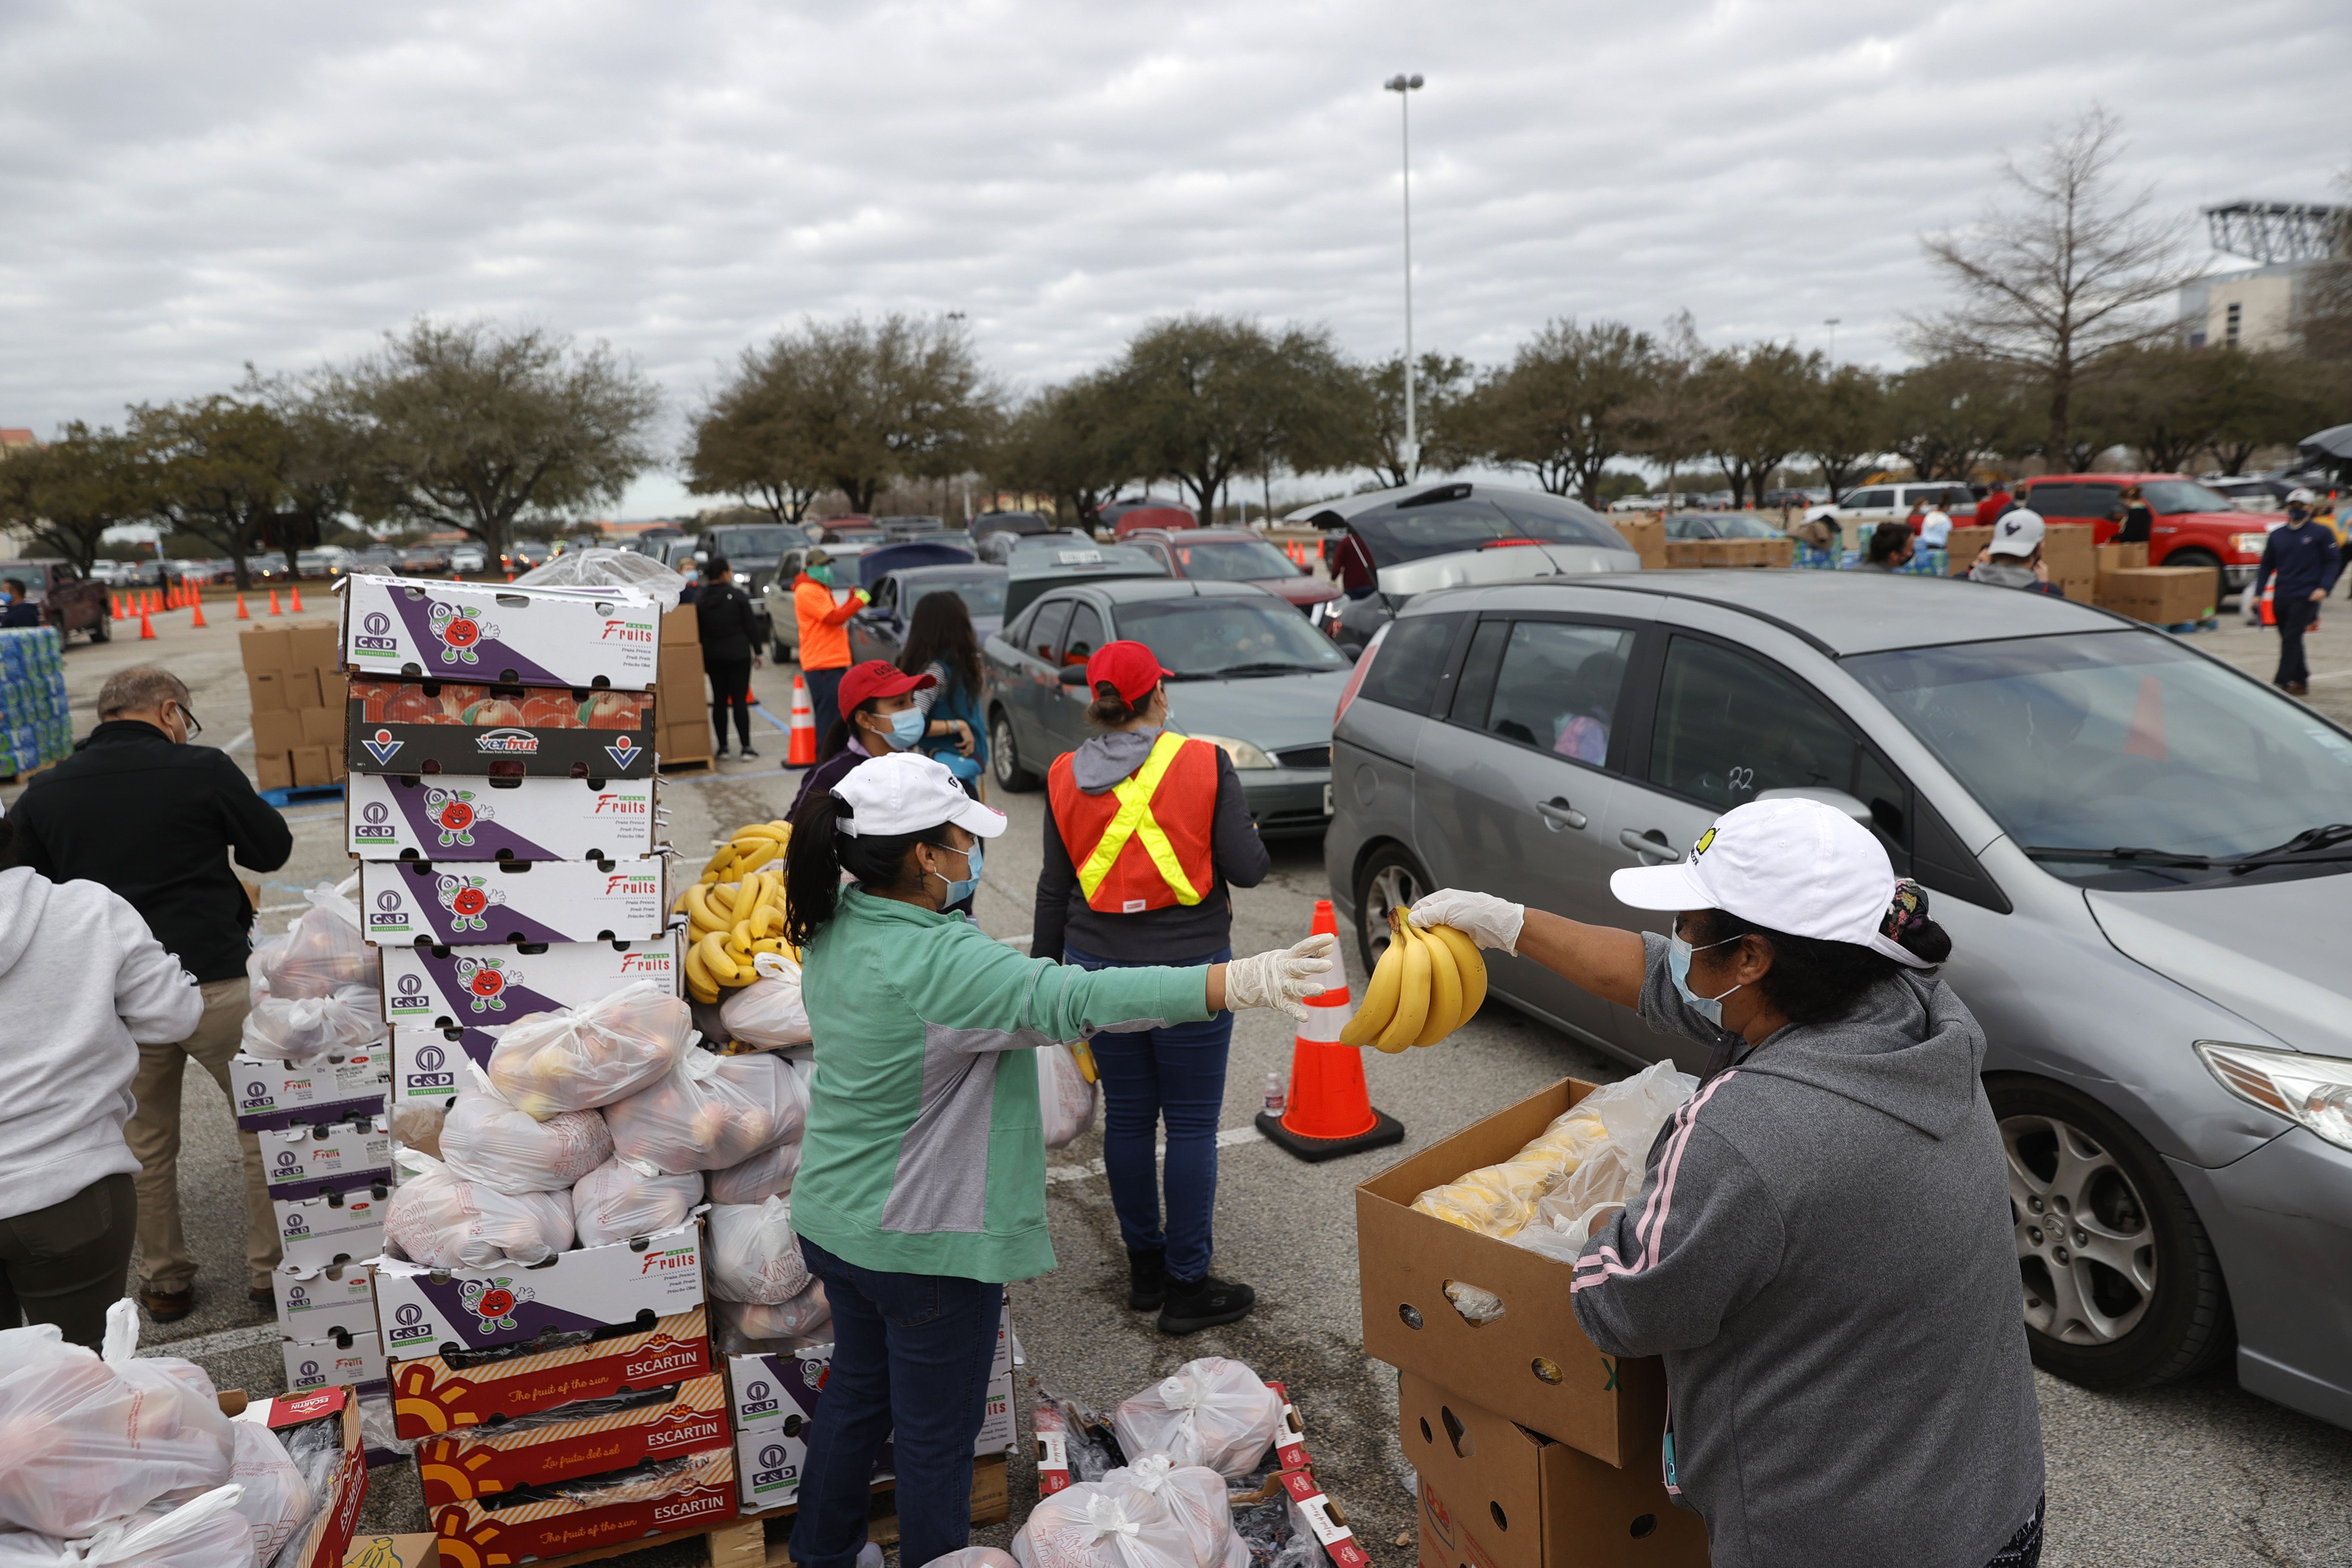 A line of cars in a parking lot, as volunteers wearing bright vests hand out boxes of food